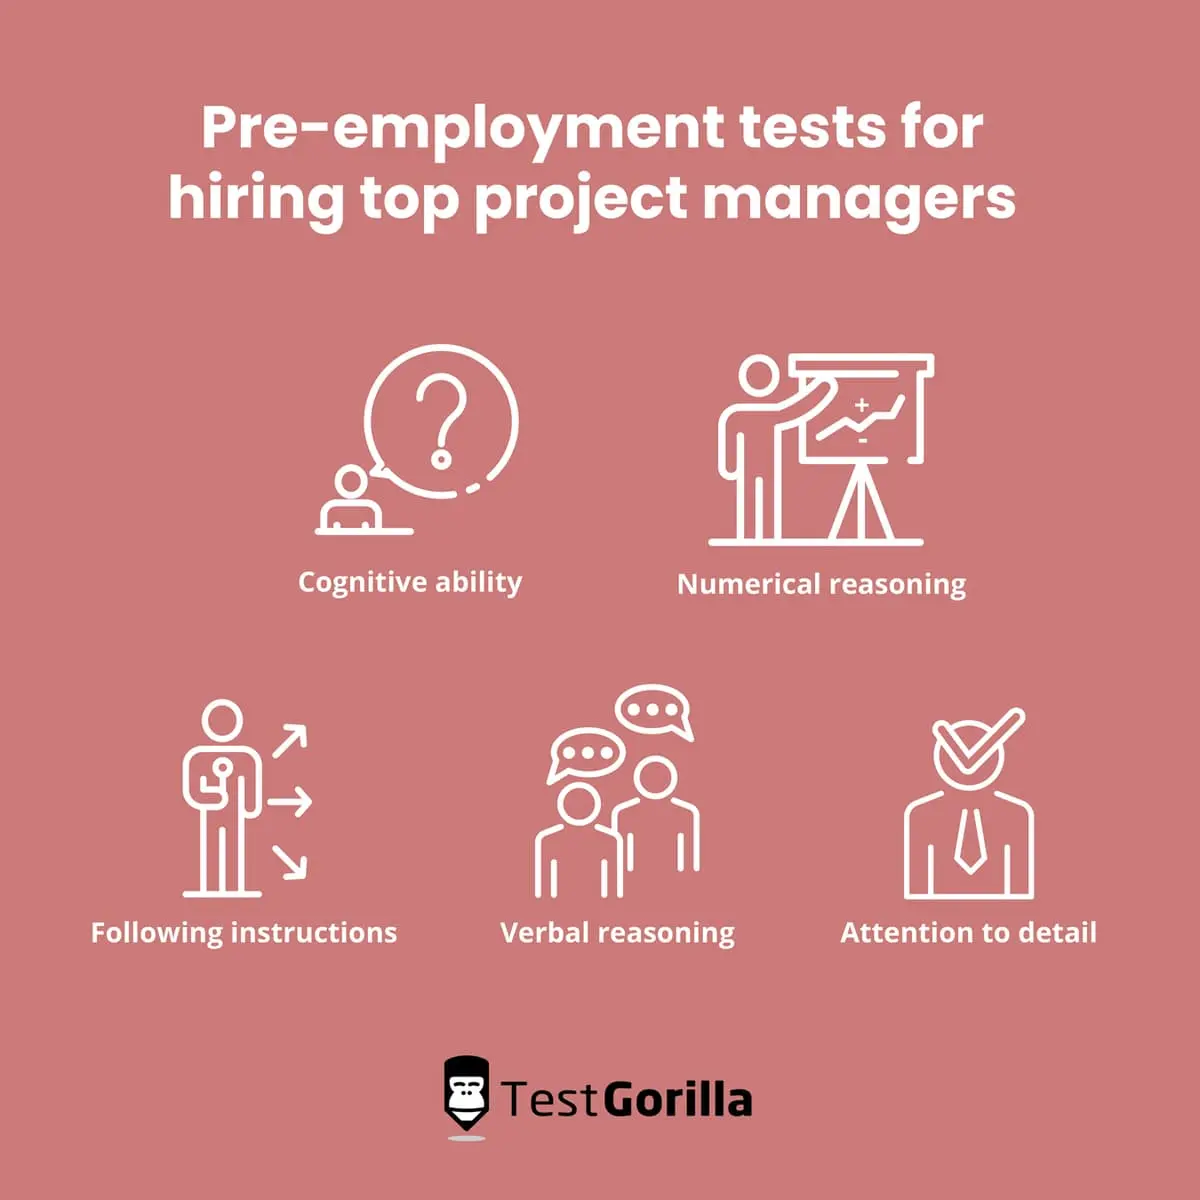 image listing different pre-employment tests for hiring top project managers